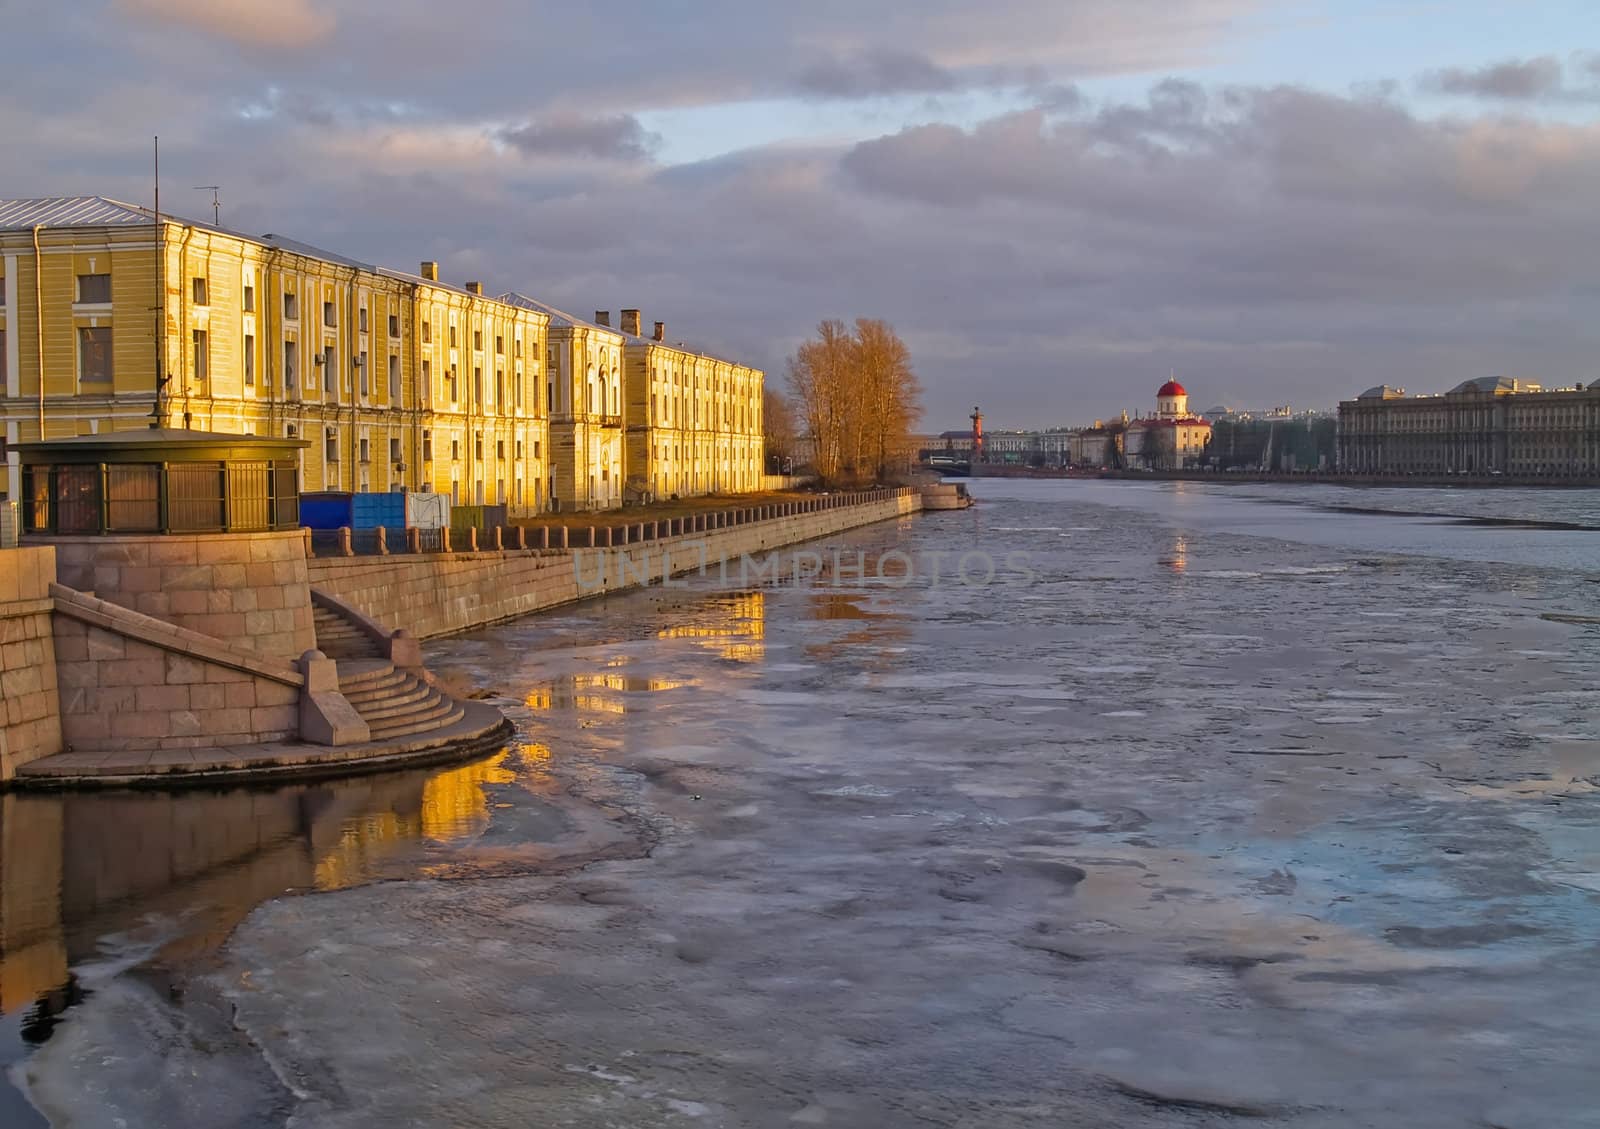 Sunset on the Neva River, Russia. Spring time ice drift